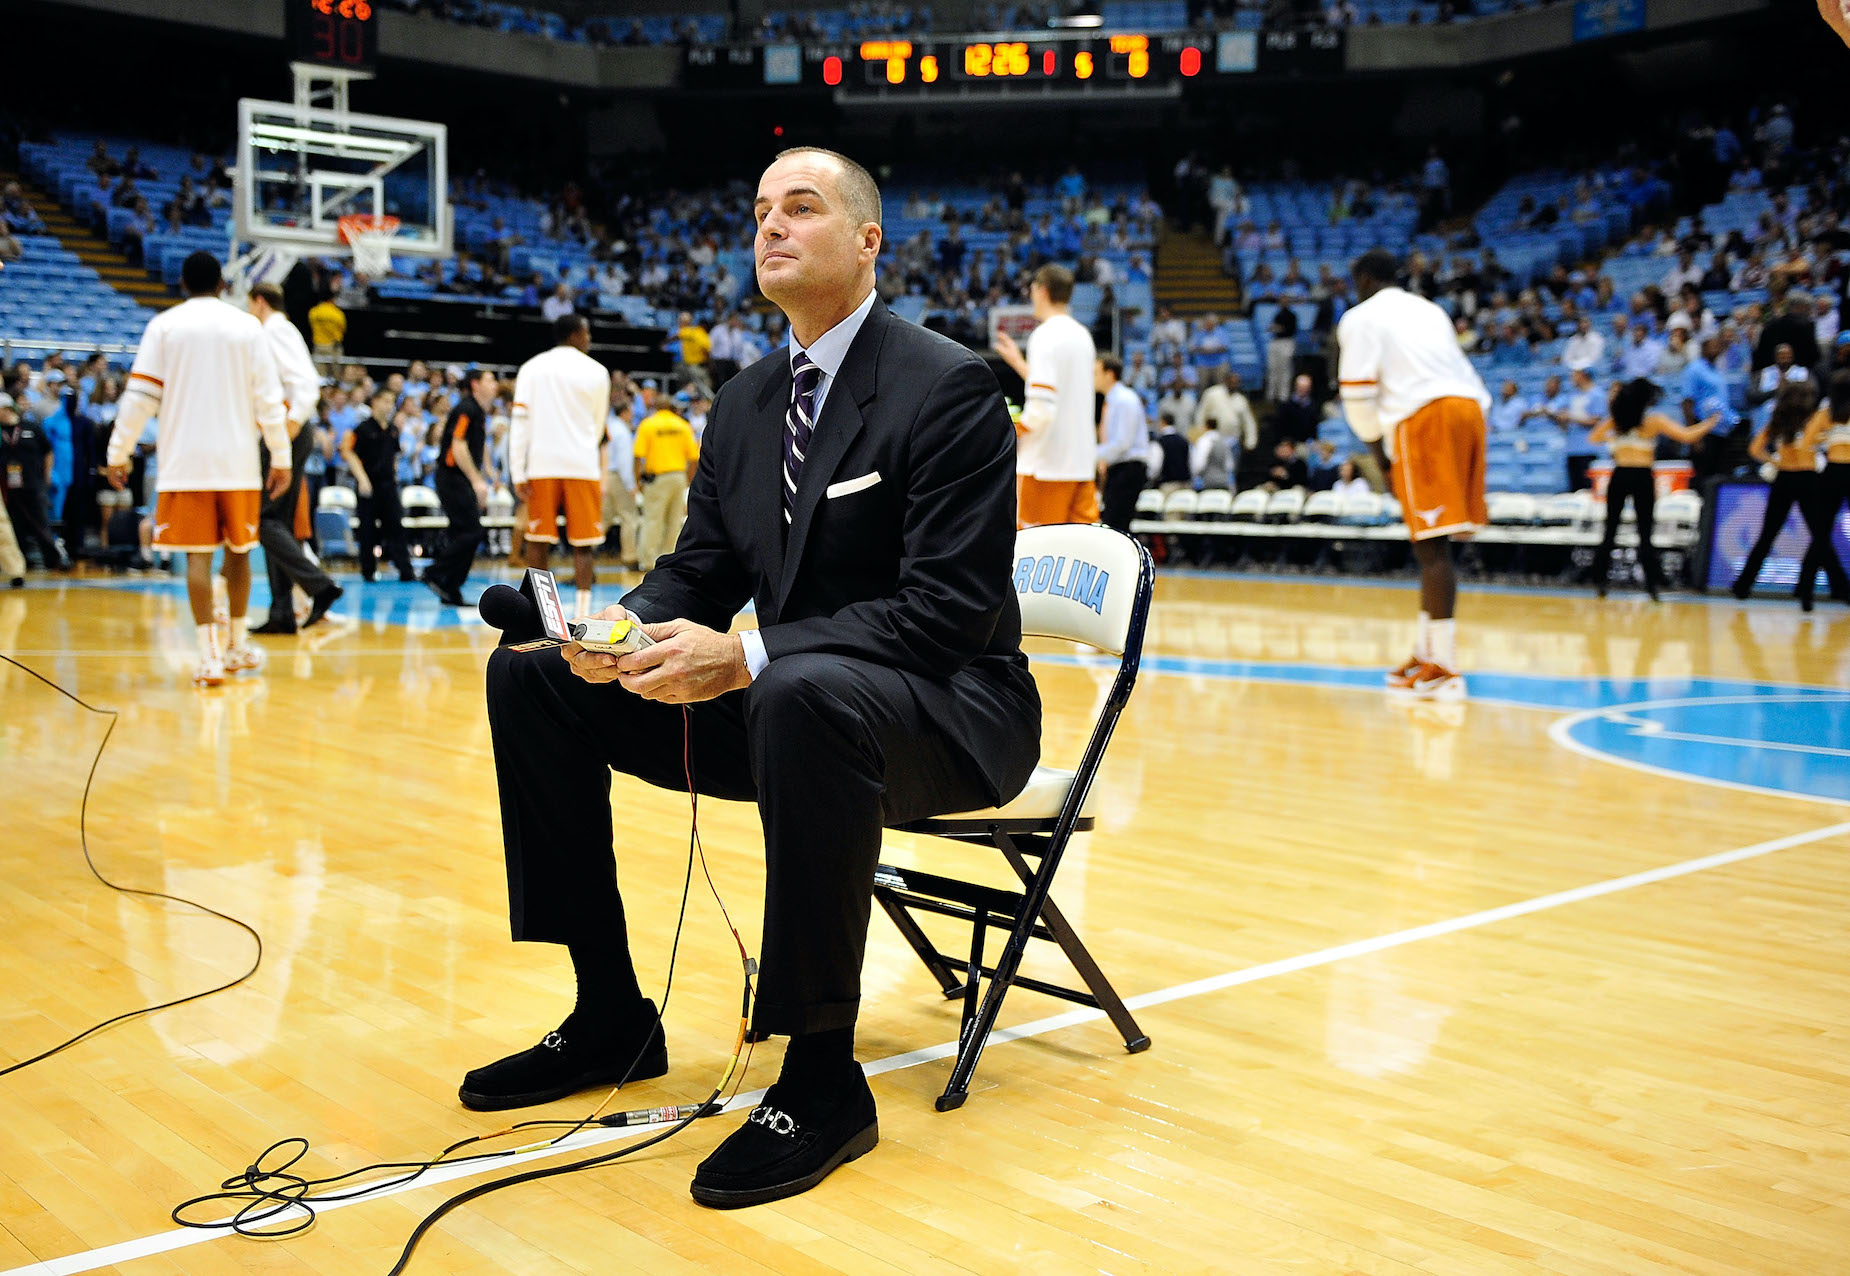 Former player turned ESPN analyst Jay Bilas sits on the court pregame